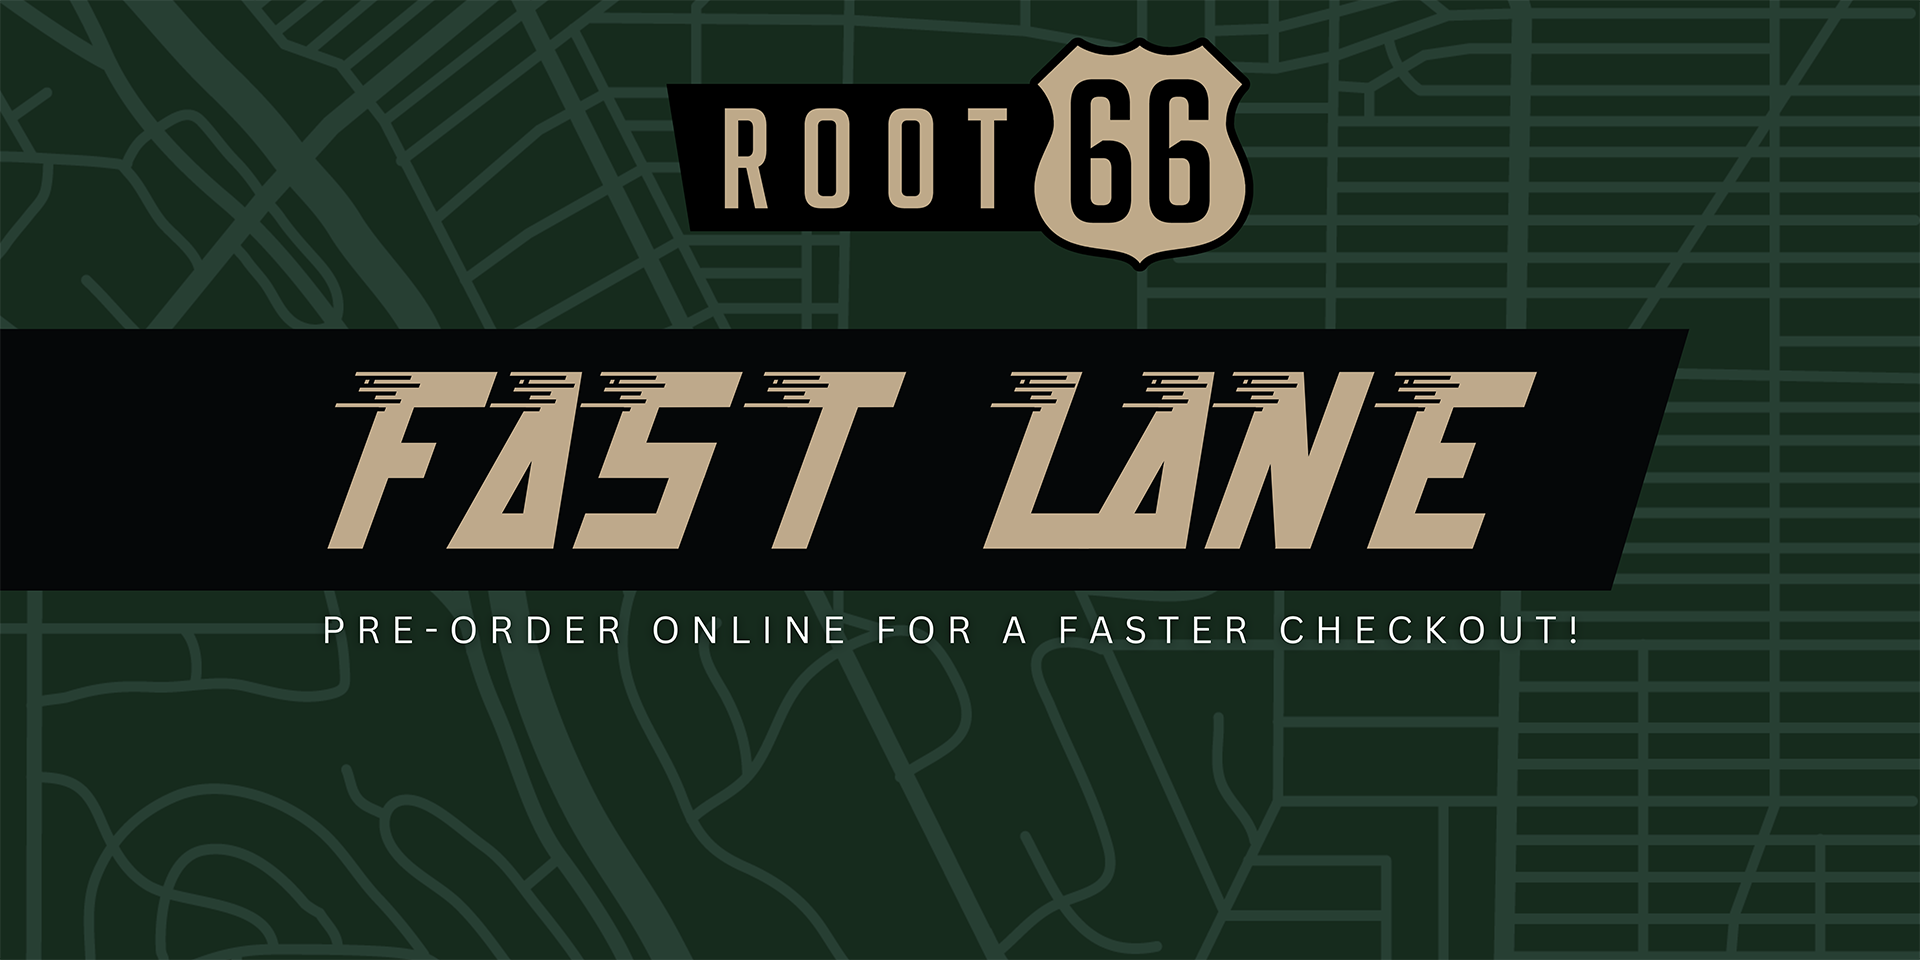 Experience Convenience with Root 66 Fast Lane – Pre-order Online for Swift Checkout!